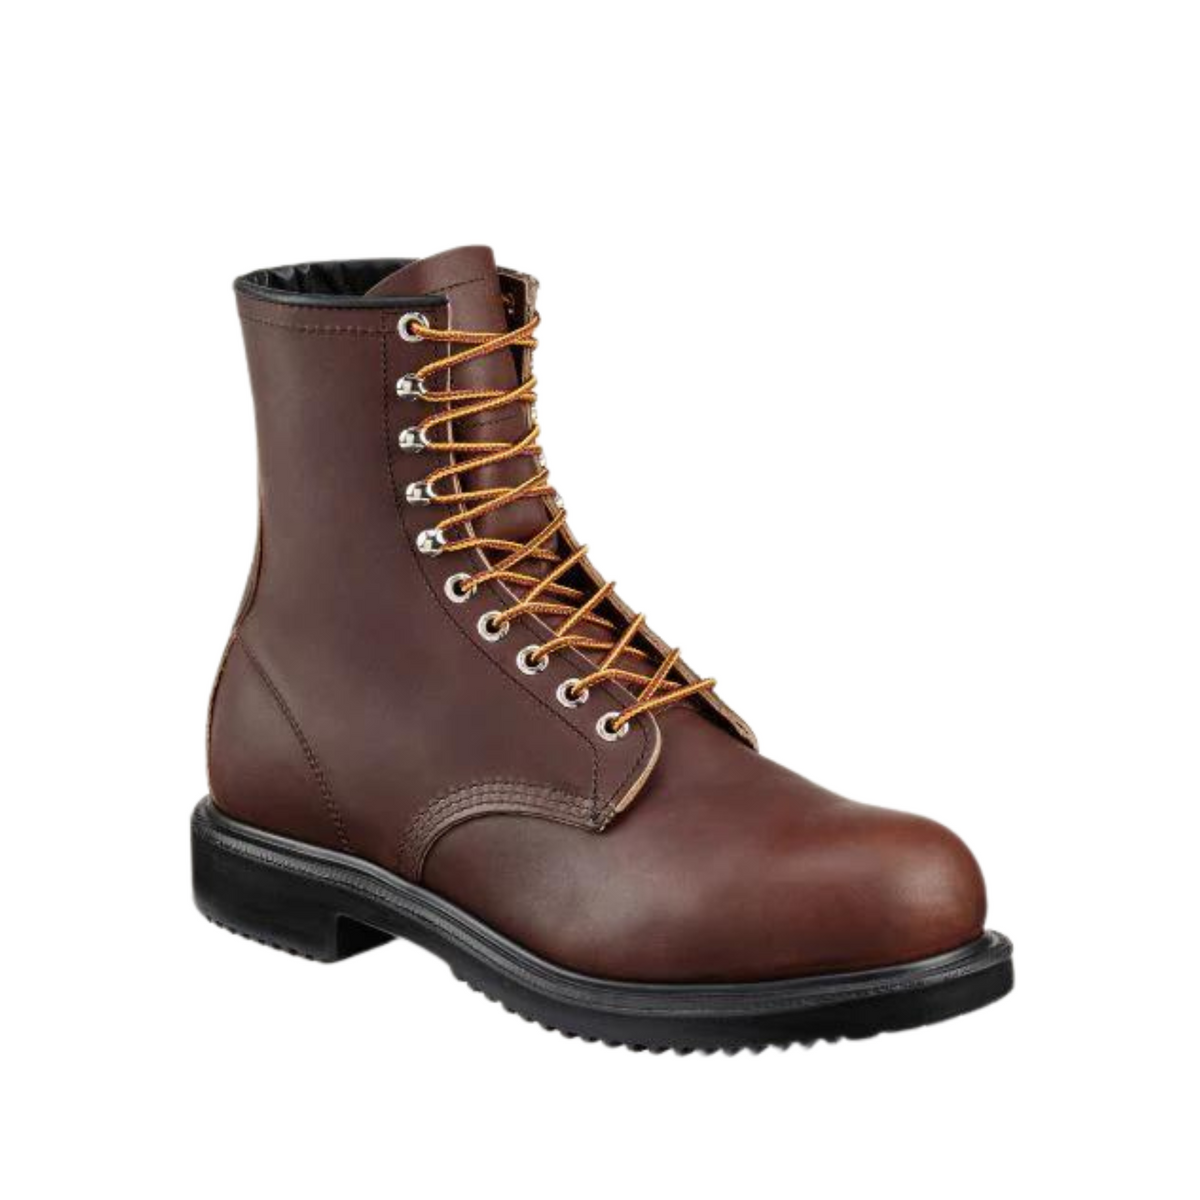 Men's Red Wing Safety 8" Supersole Laceup Steel Boot